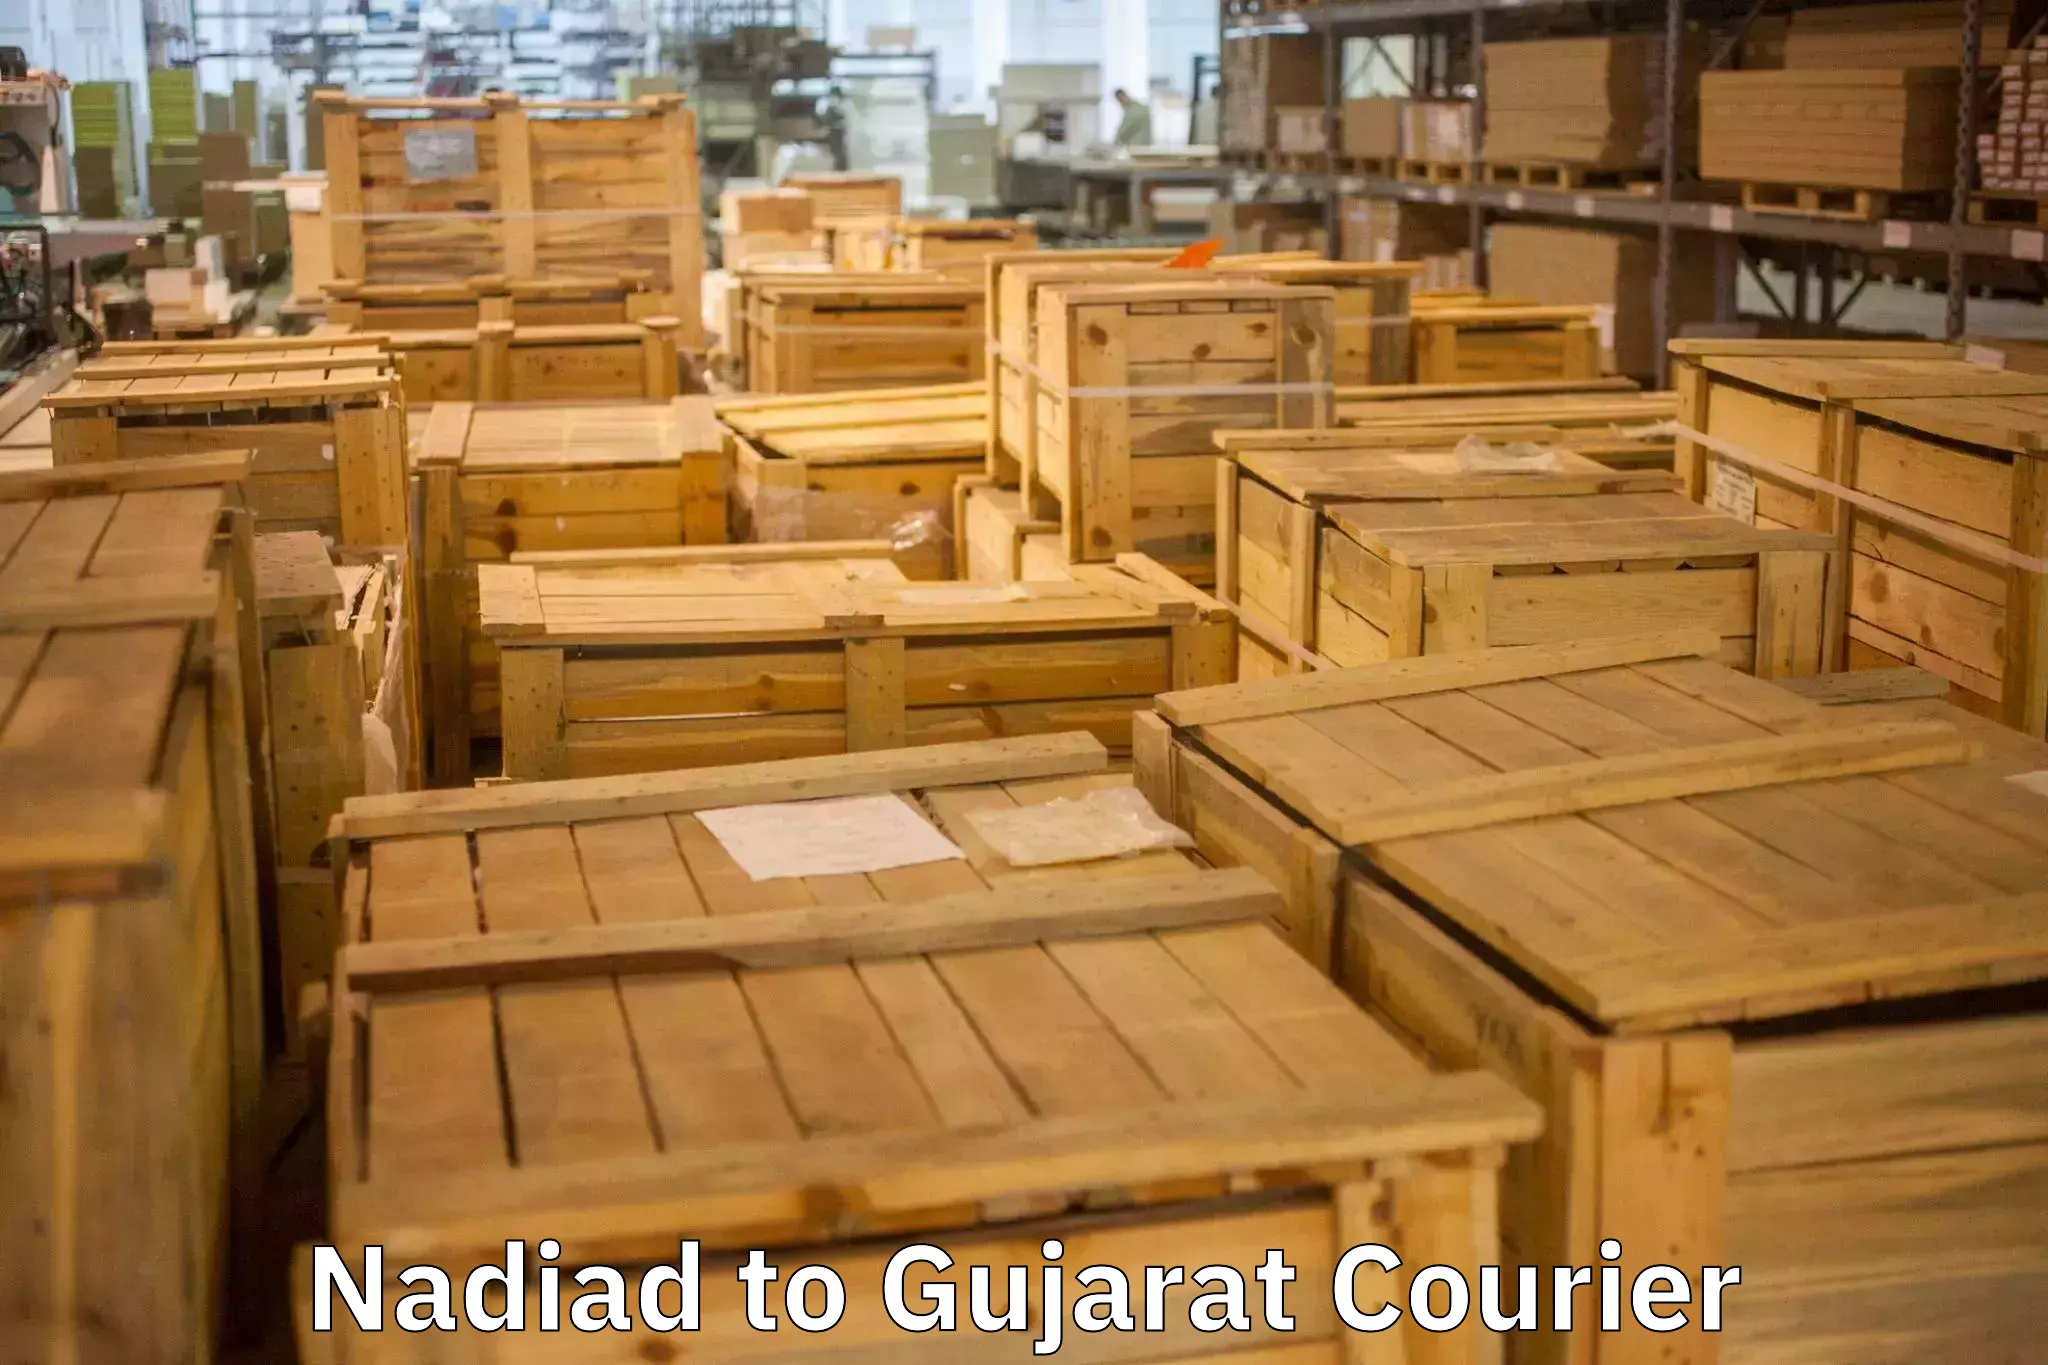 Furniture relocation experts Nadiad to Ahwa